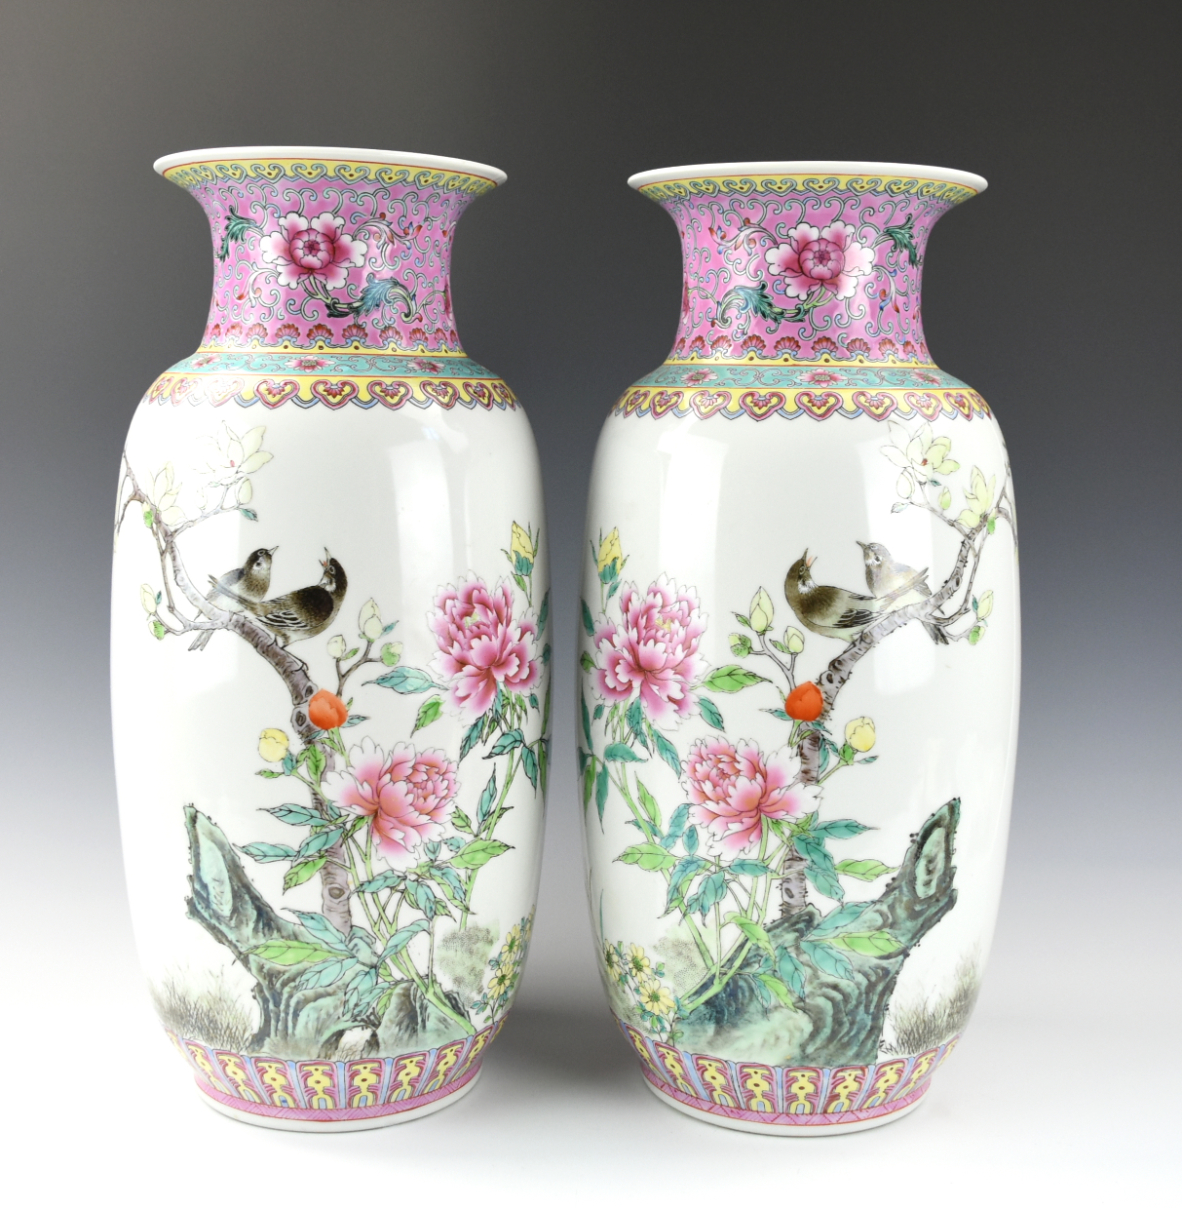 PAIR OF LARGE CHINESE FAMILLE ROSE